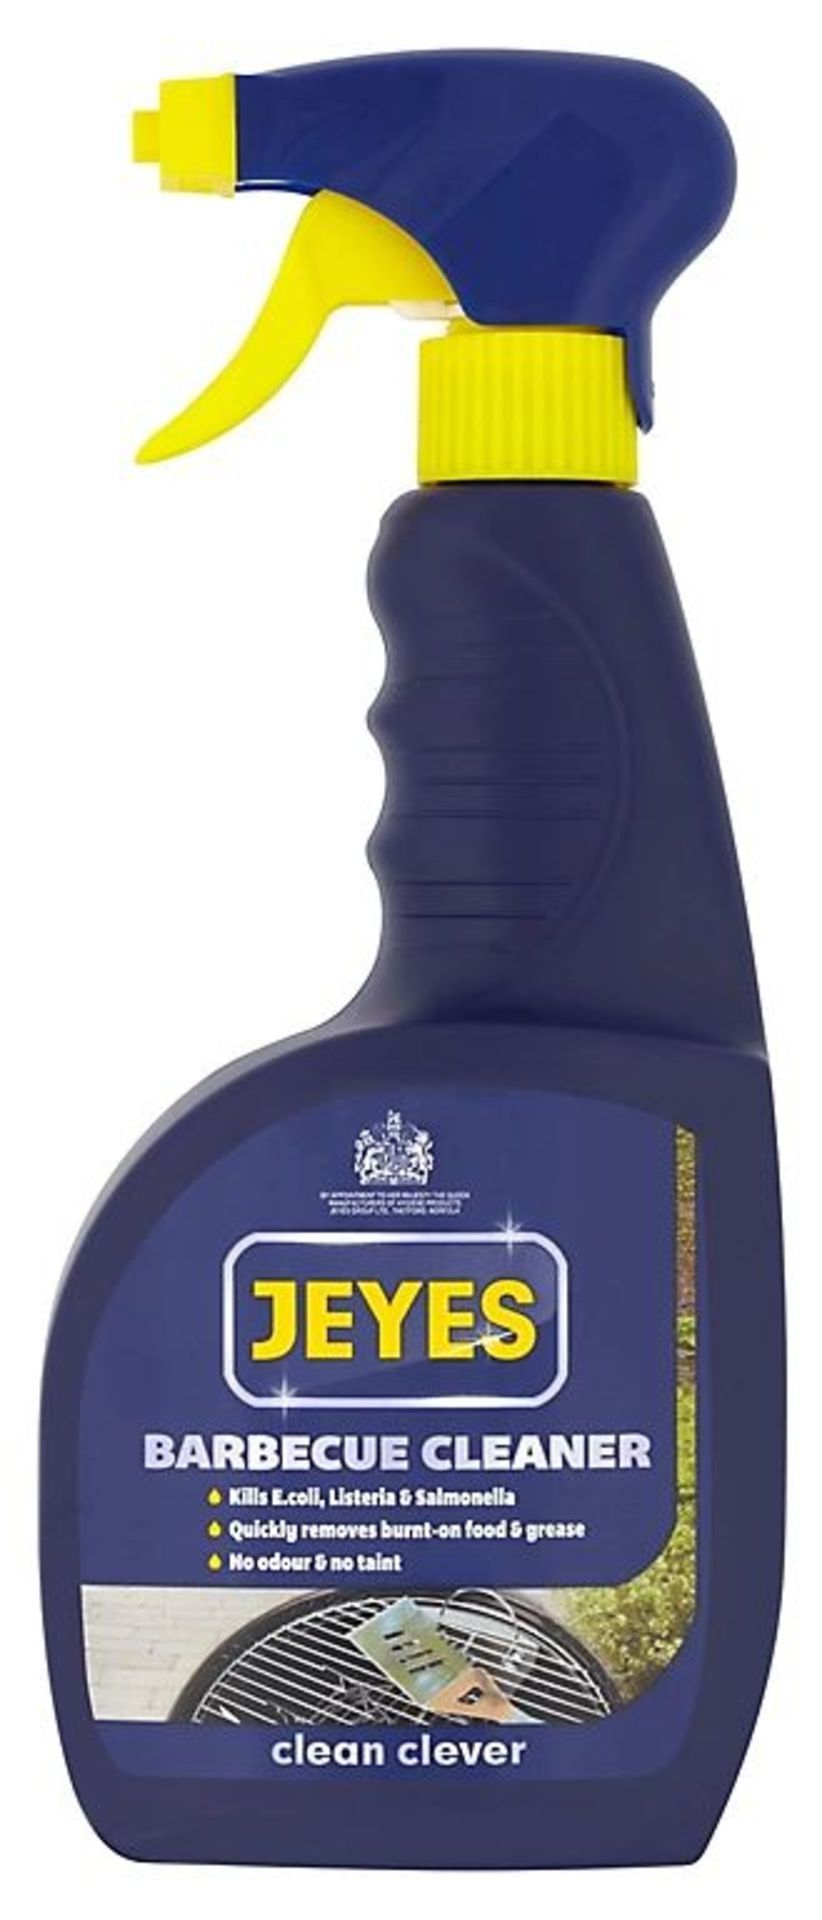 30 x Jeyes Barbecue Cleaner Trigger Bottle 750ml. (ROW1.7)